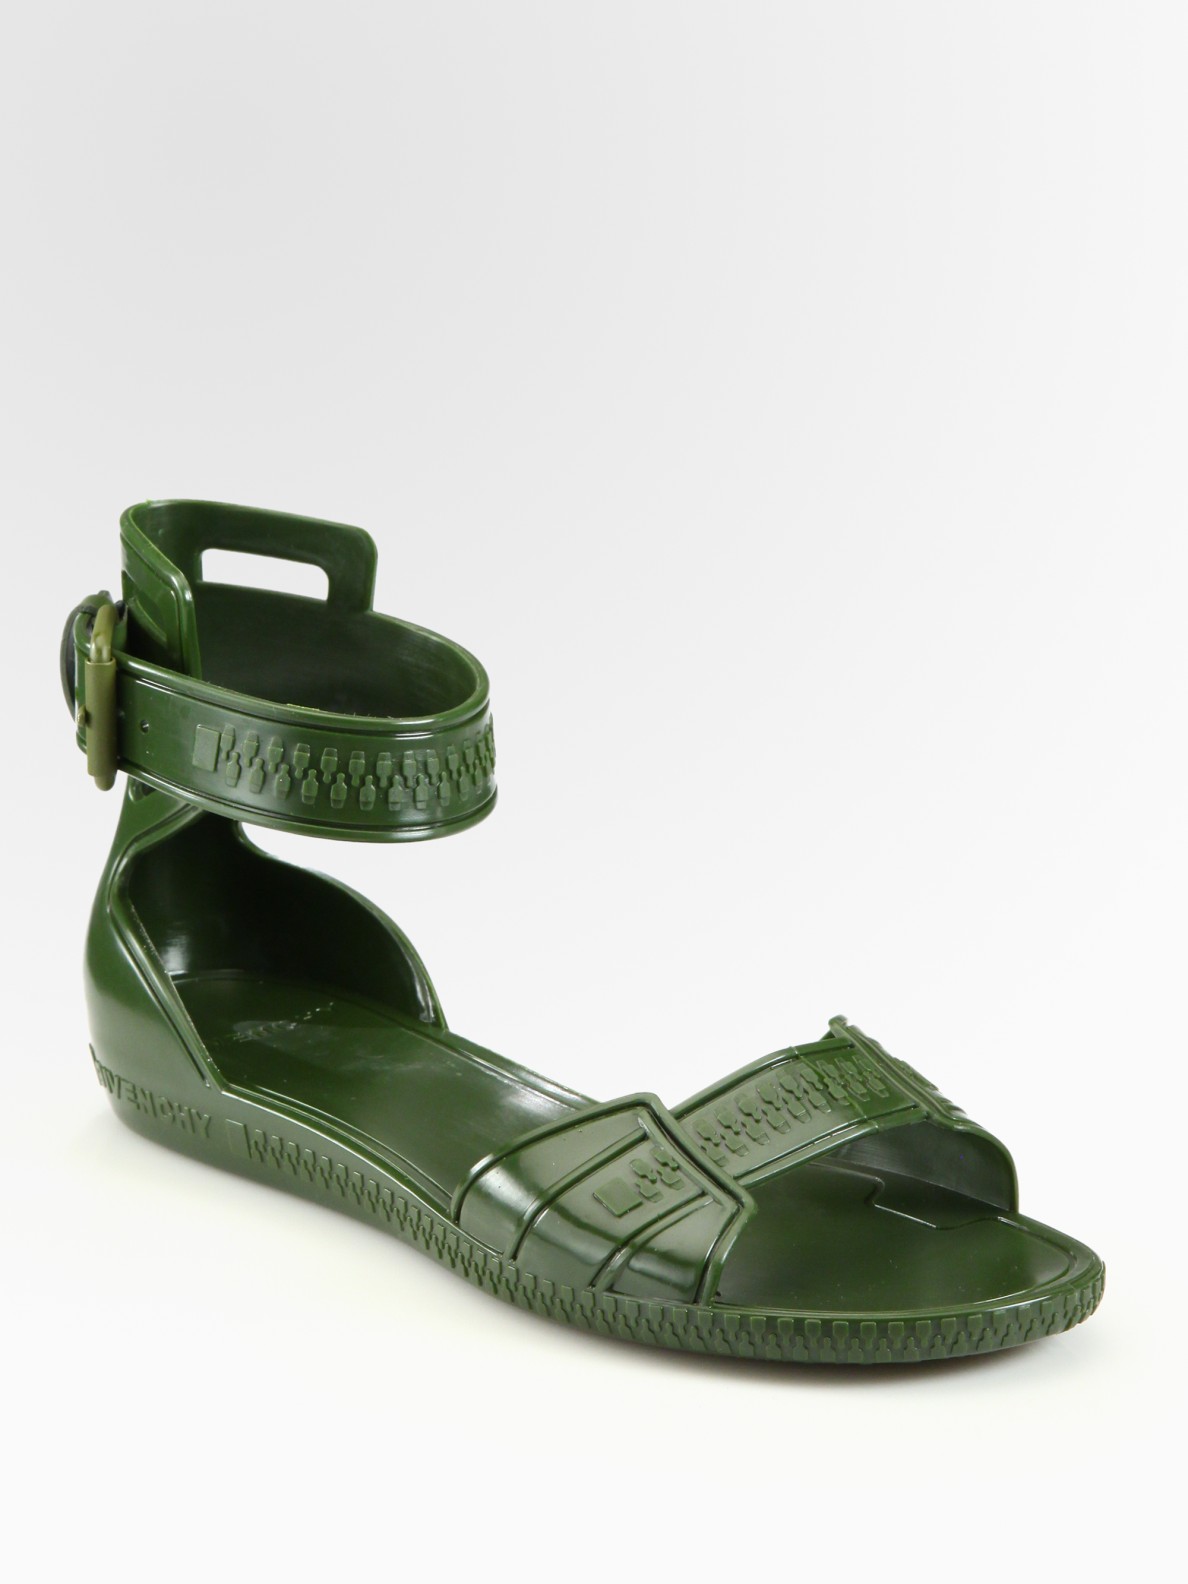 Givenchy Flat Jelly Sandals in Green (militarygreen) | Lyst